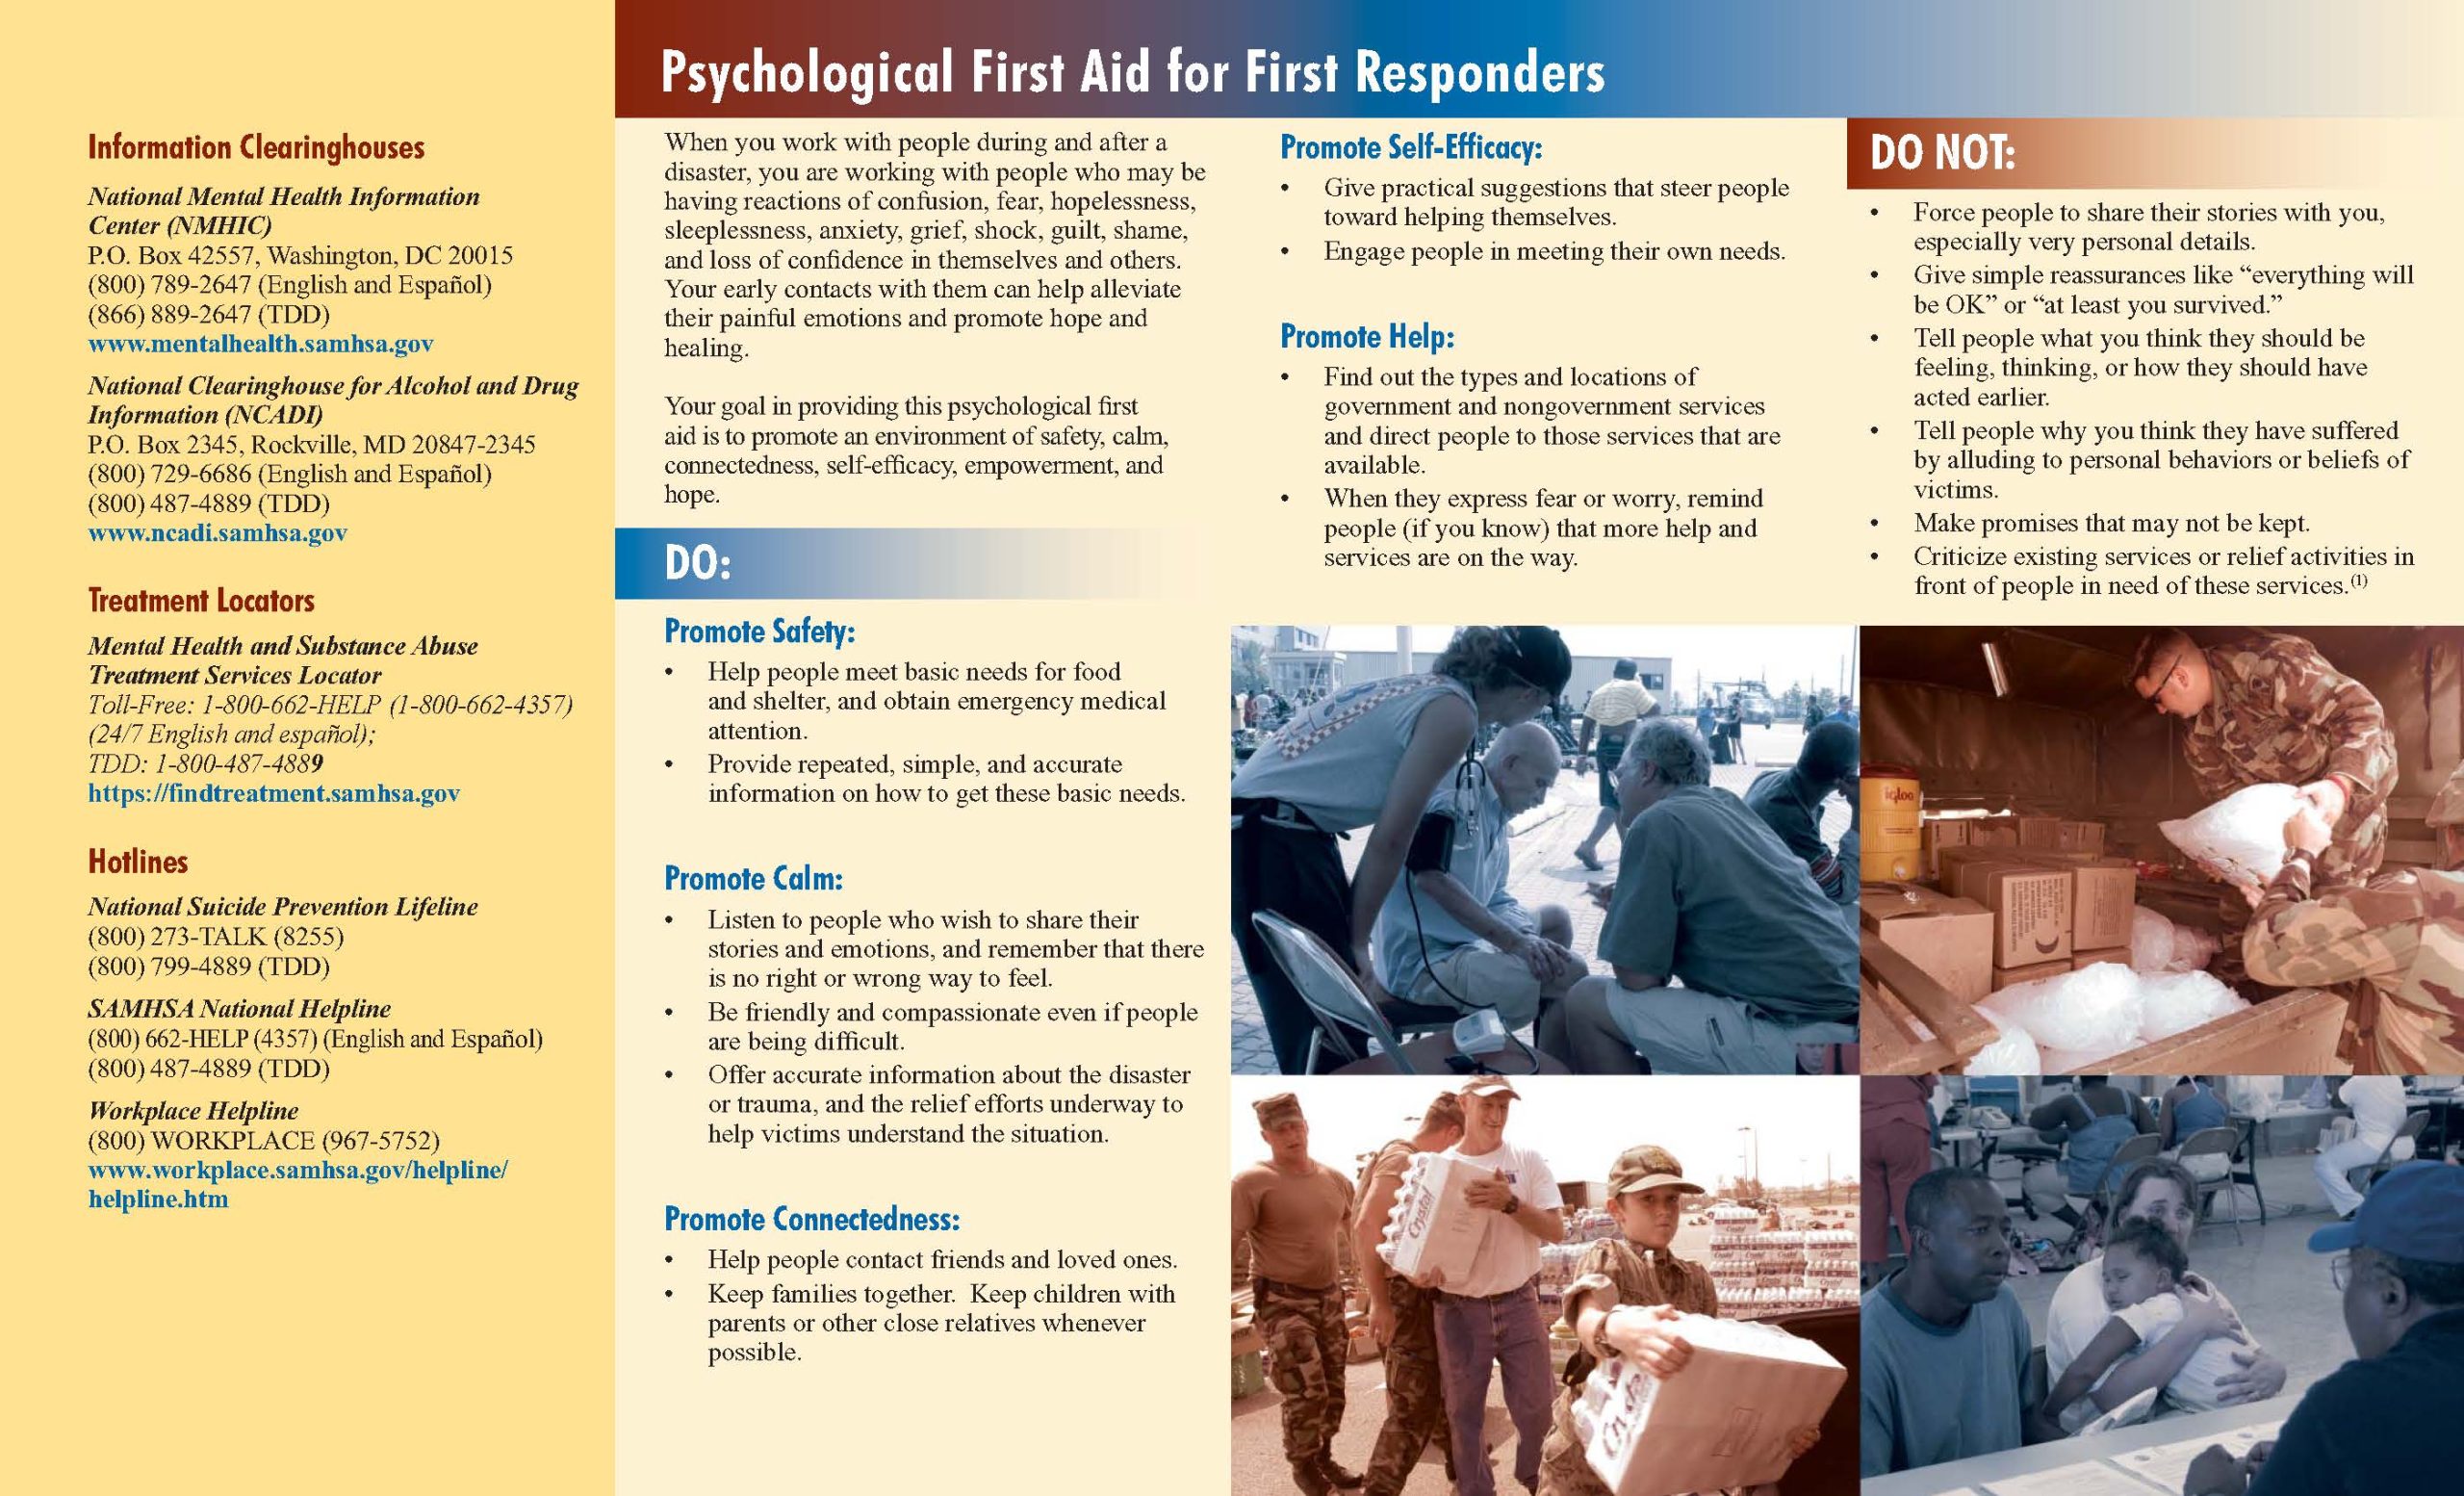 Psychological First Aid page 2